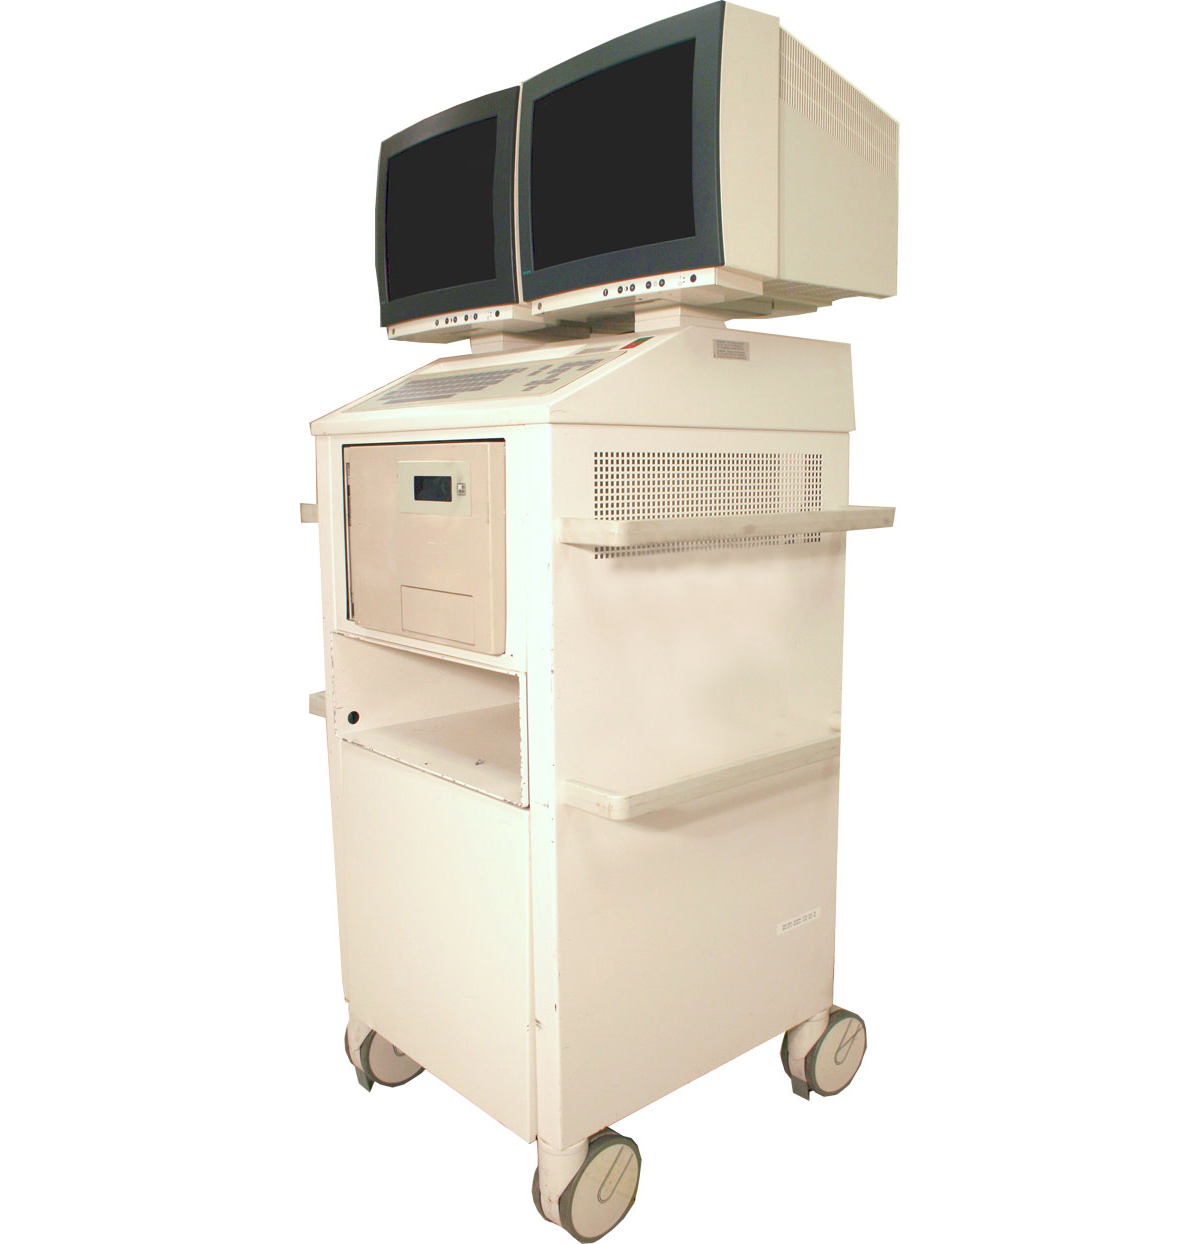 Siemens Siremobil model mobile C-arm fluoro cart with CRTs model # Simomed 3792079X2007 before Modalixx upgrade